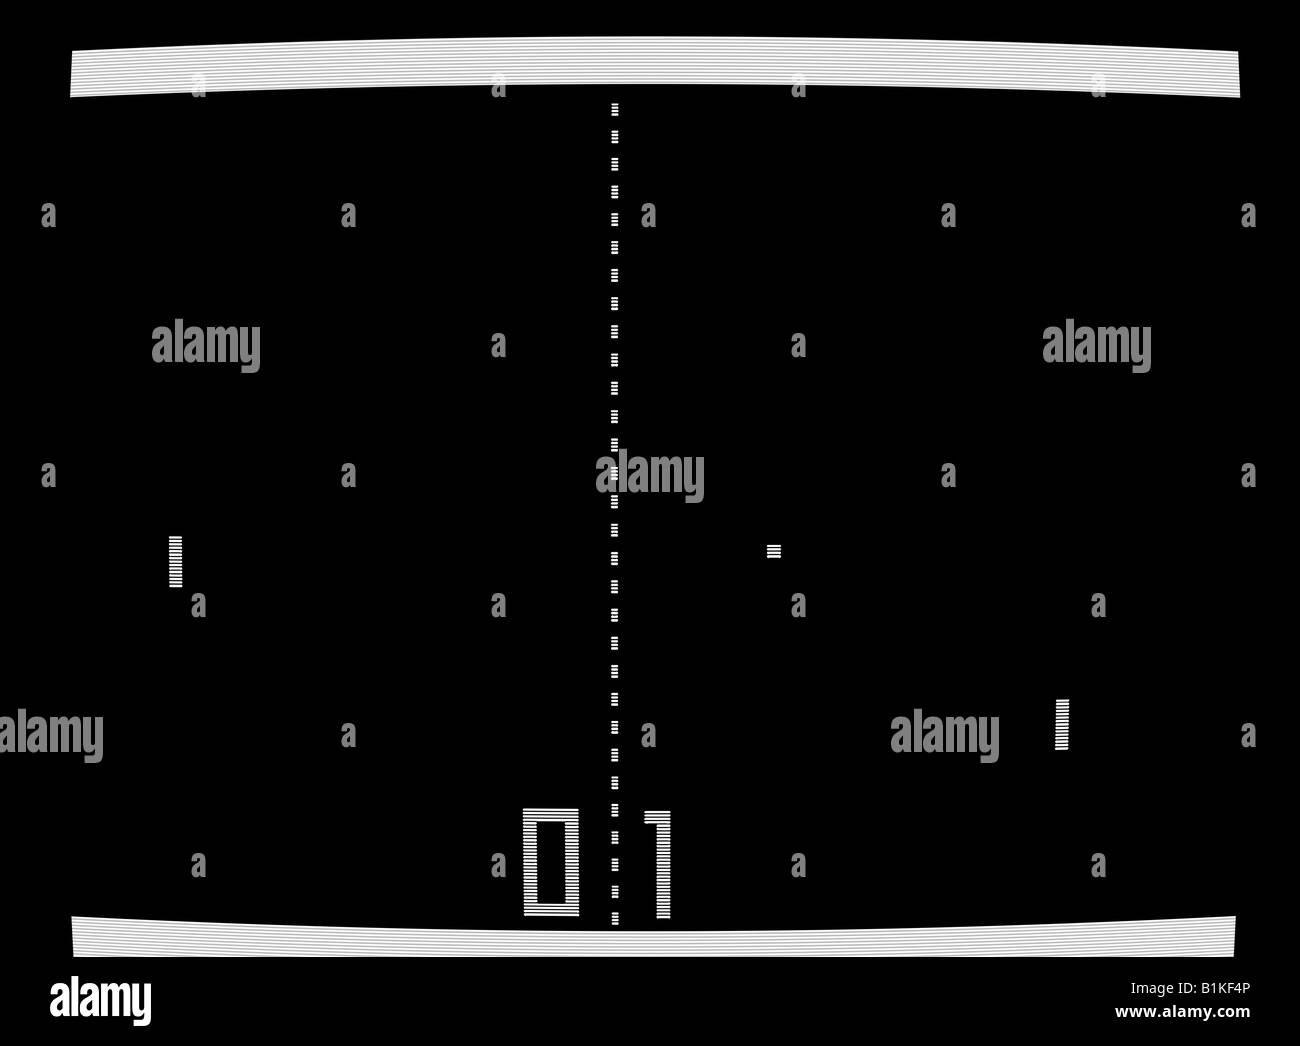 Close up image of a TV screen with an ongoing game of Pong on it Stock Photo